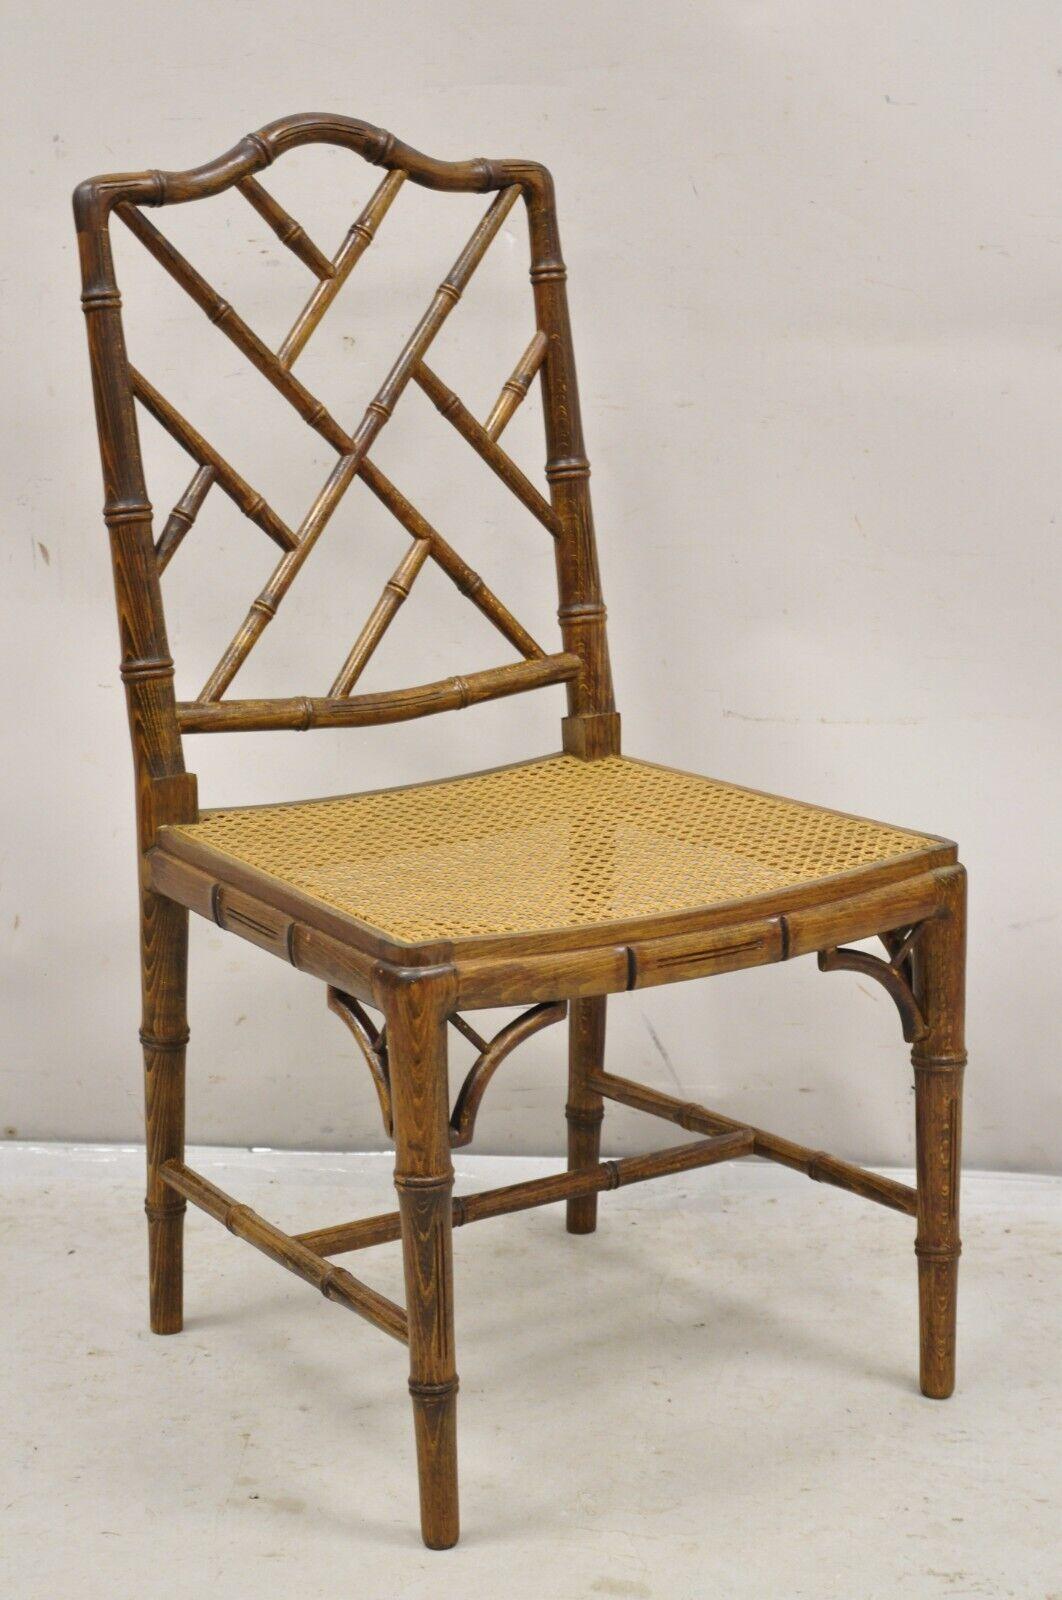 Vintage Chinese Chippendale Hollywood Regency Faux Bamboo Cane Dining Chairs - Set of 6. Item features 4 side chairs, 2 arm chairs, solid wood frames, cane seats, iconic faux bamboo design. Circa Mid 20th Century.
Measurements: 
Arm chairs: 36